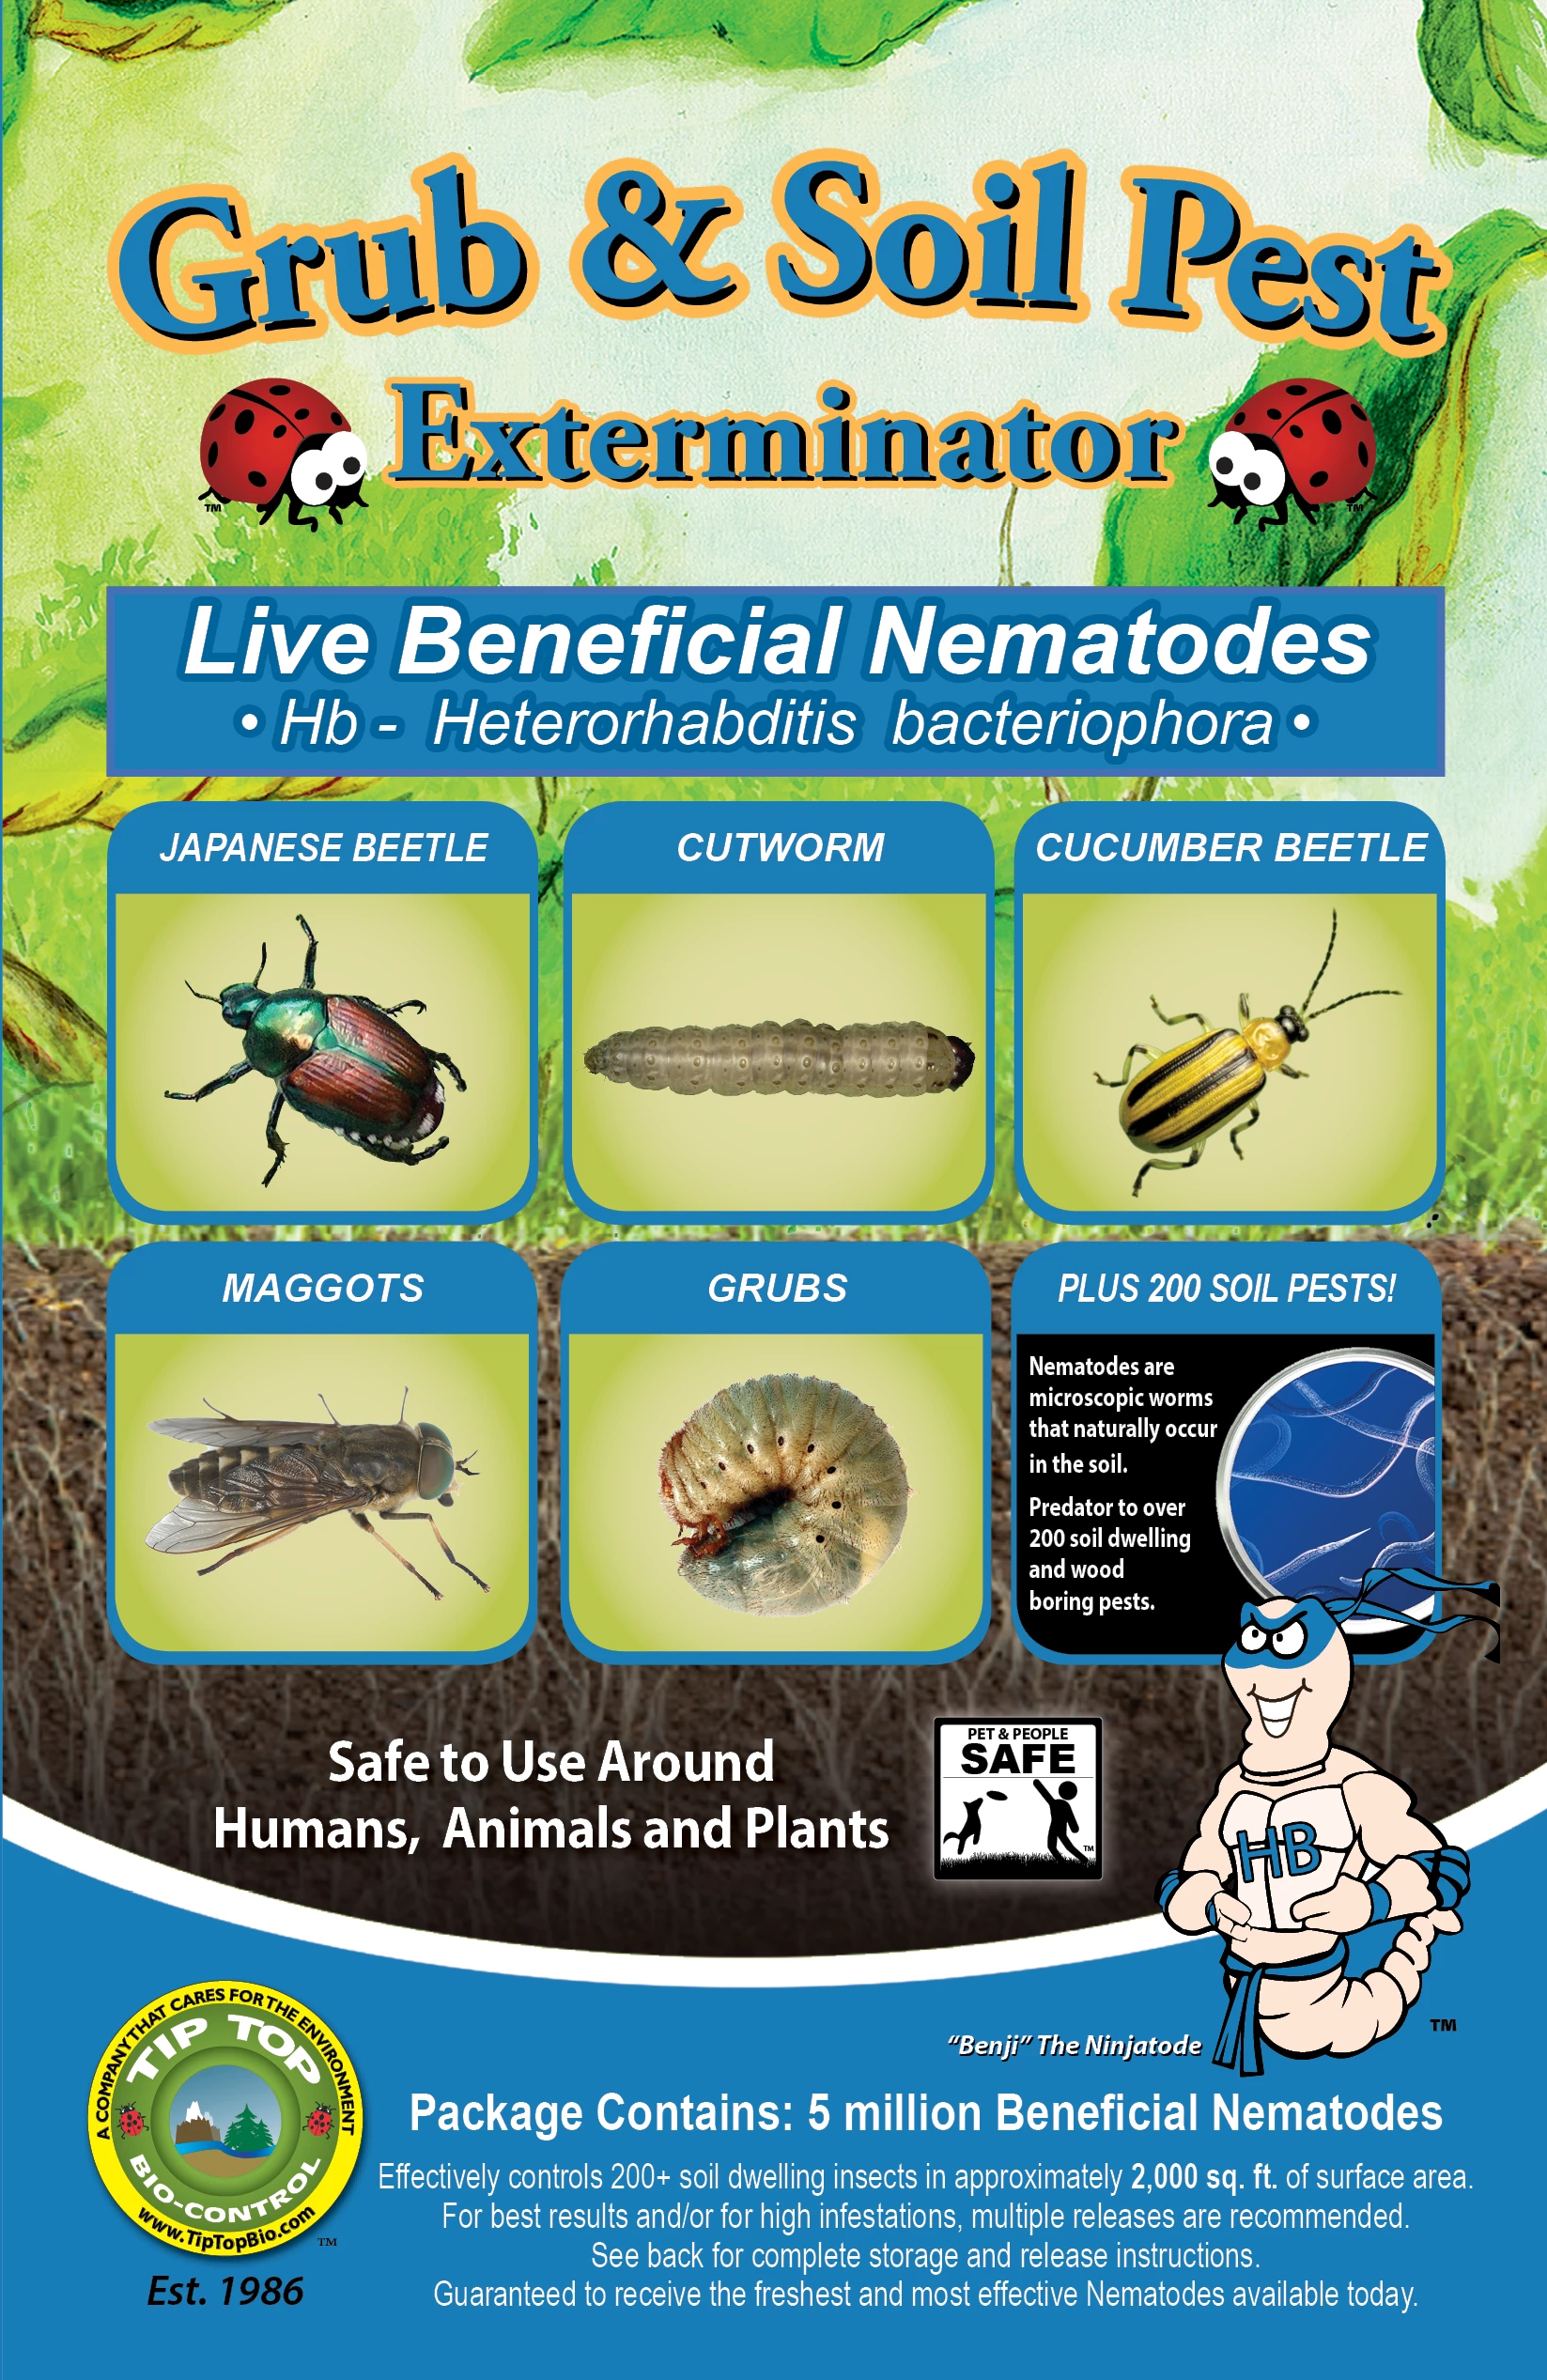 Can you safely mix nematodes and pesticides? – ONfloriculture